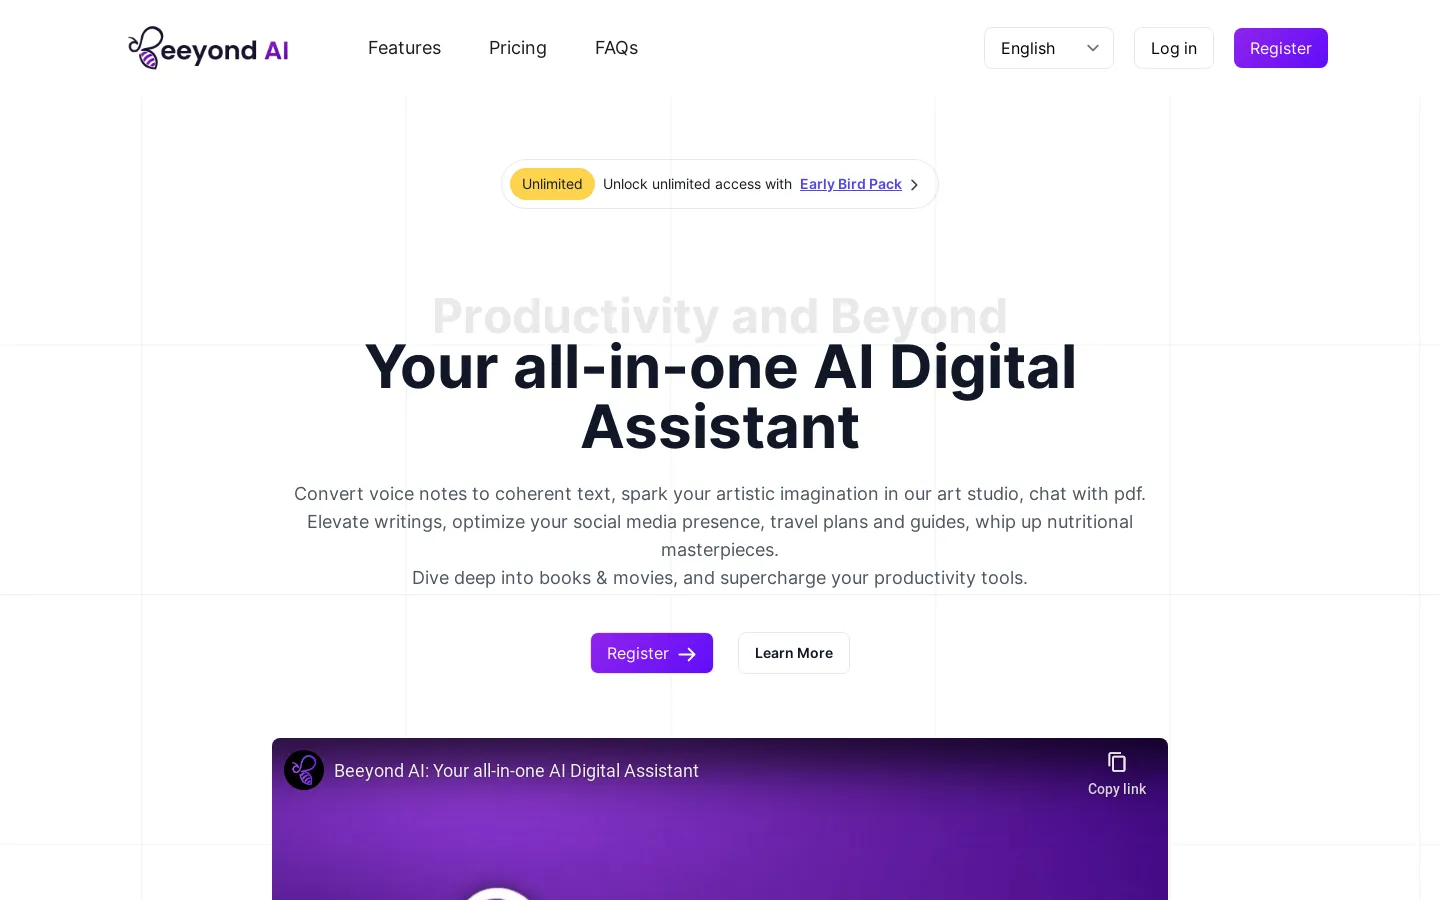 Beeyond AI - Your All-In-One AI Digital Assistant